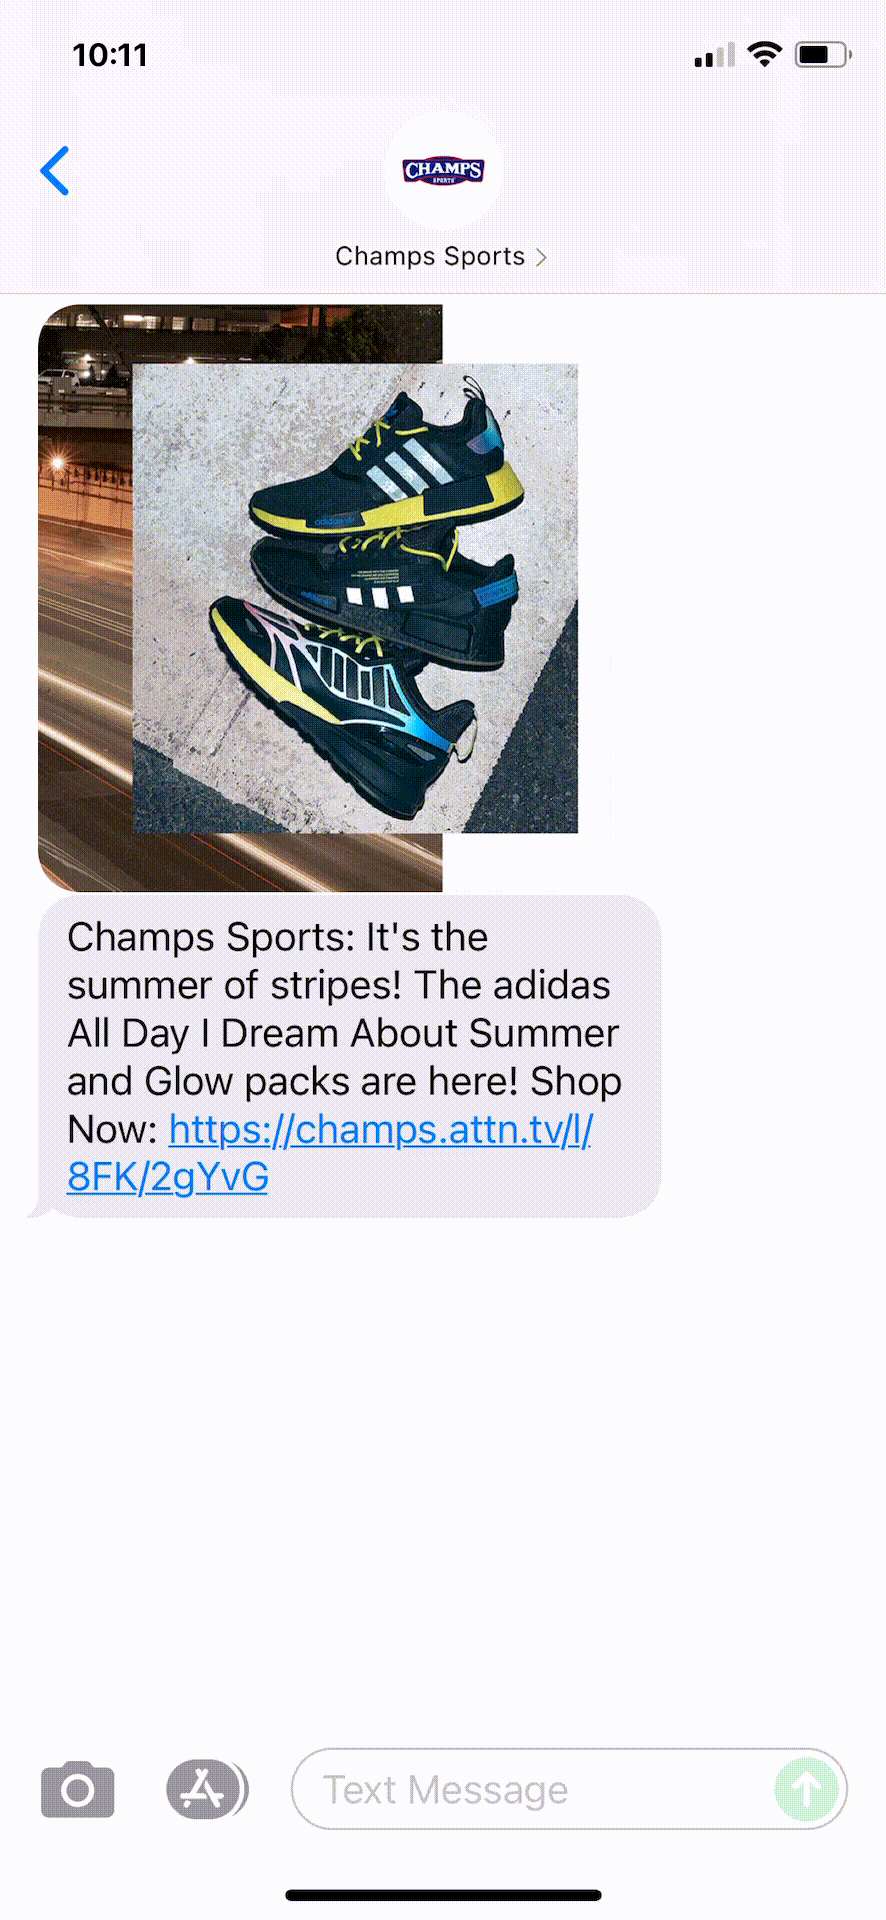 Champs-Text-Message-Marketing-Example-07.12.2021